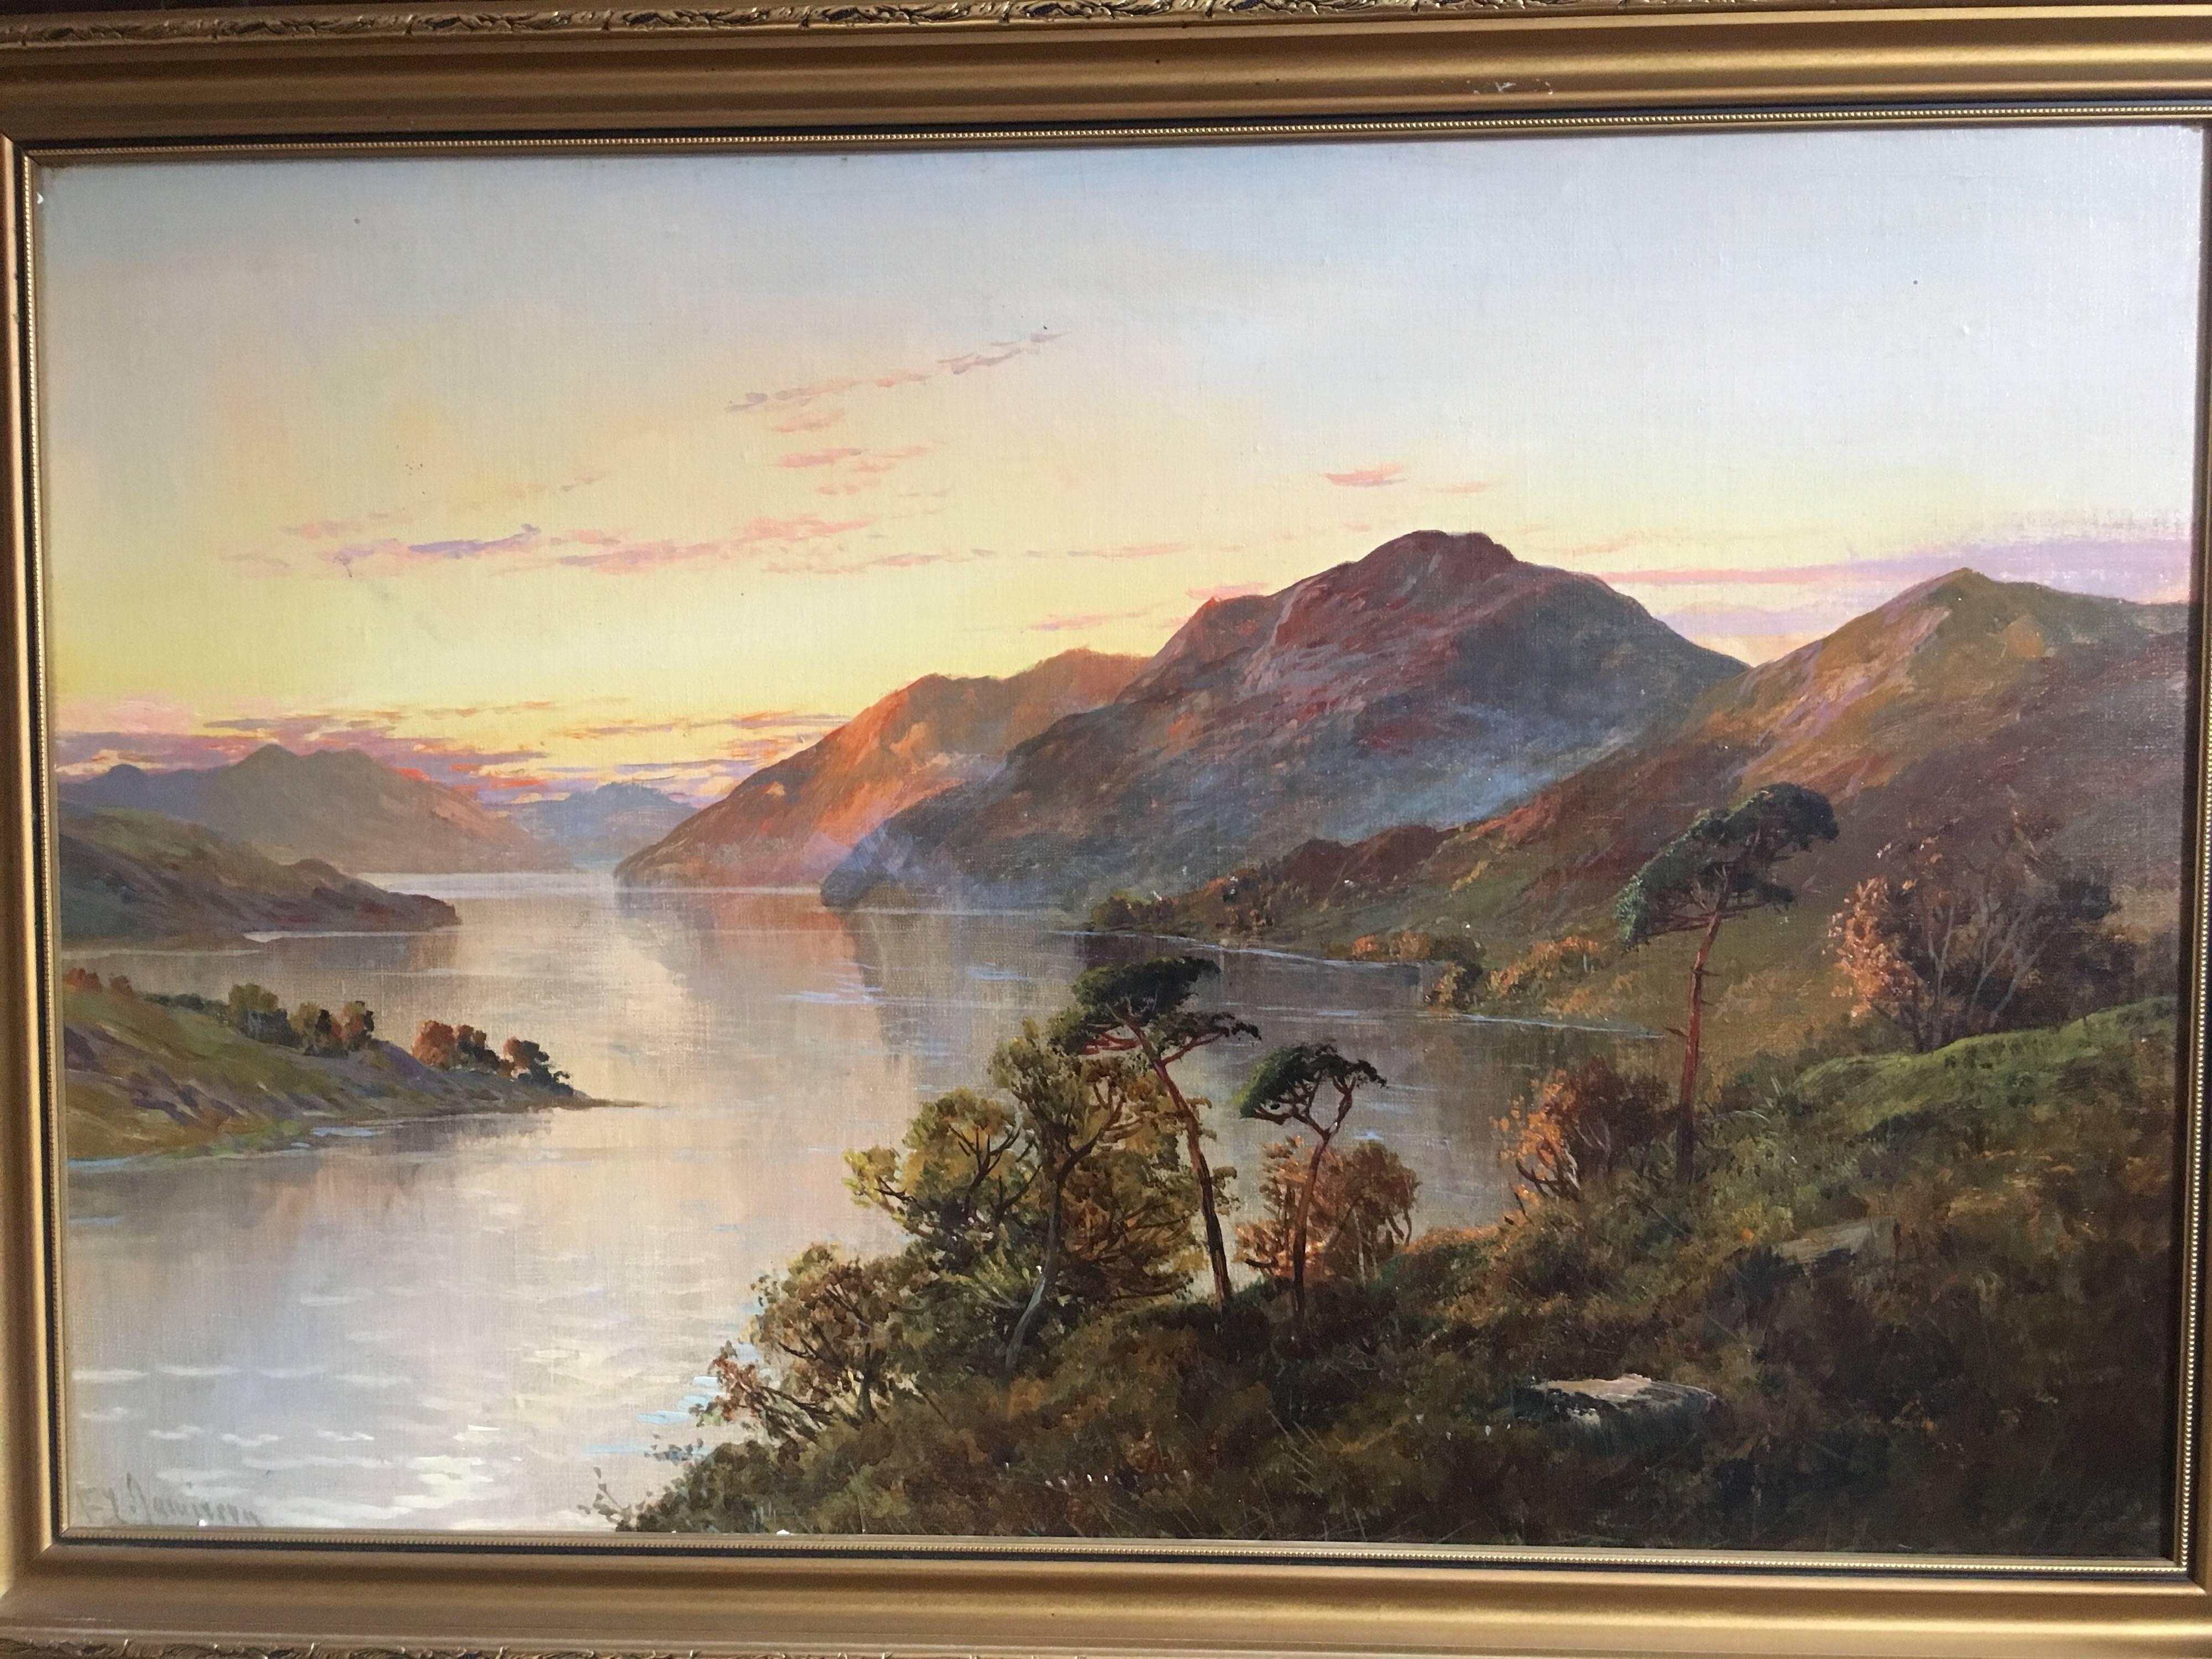 Loch Lomond Antique Scottish Oil Painting Sunset, Signed - Brown Animal Painting by Francis E. Jamieson